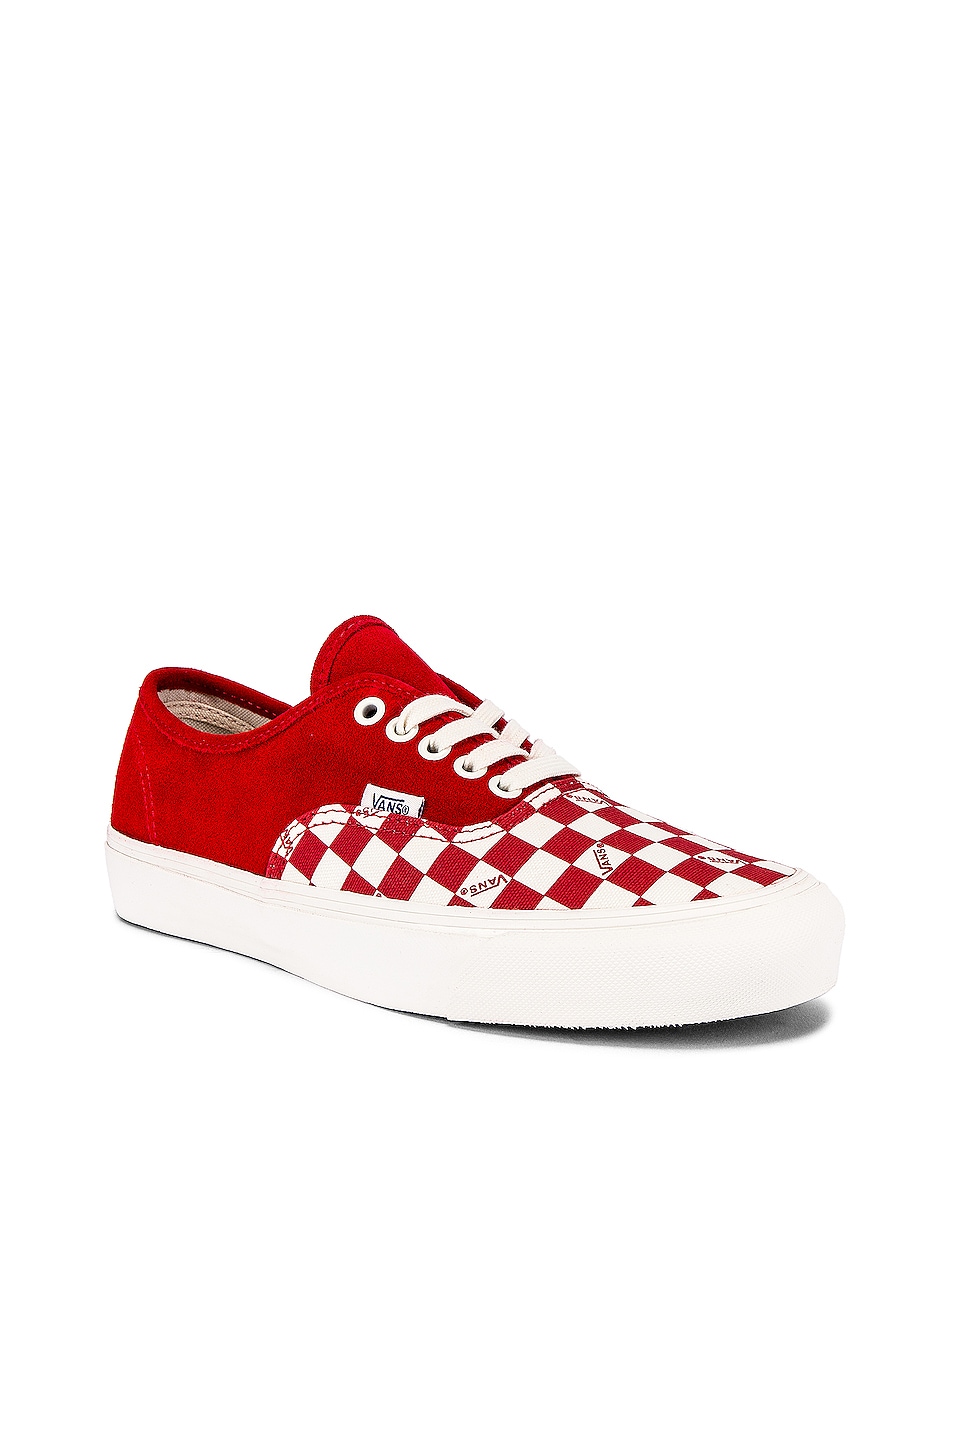 Image 1 of Vans Vault OG Authentic LX in Racing Red & Checkerboard